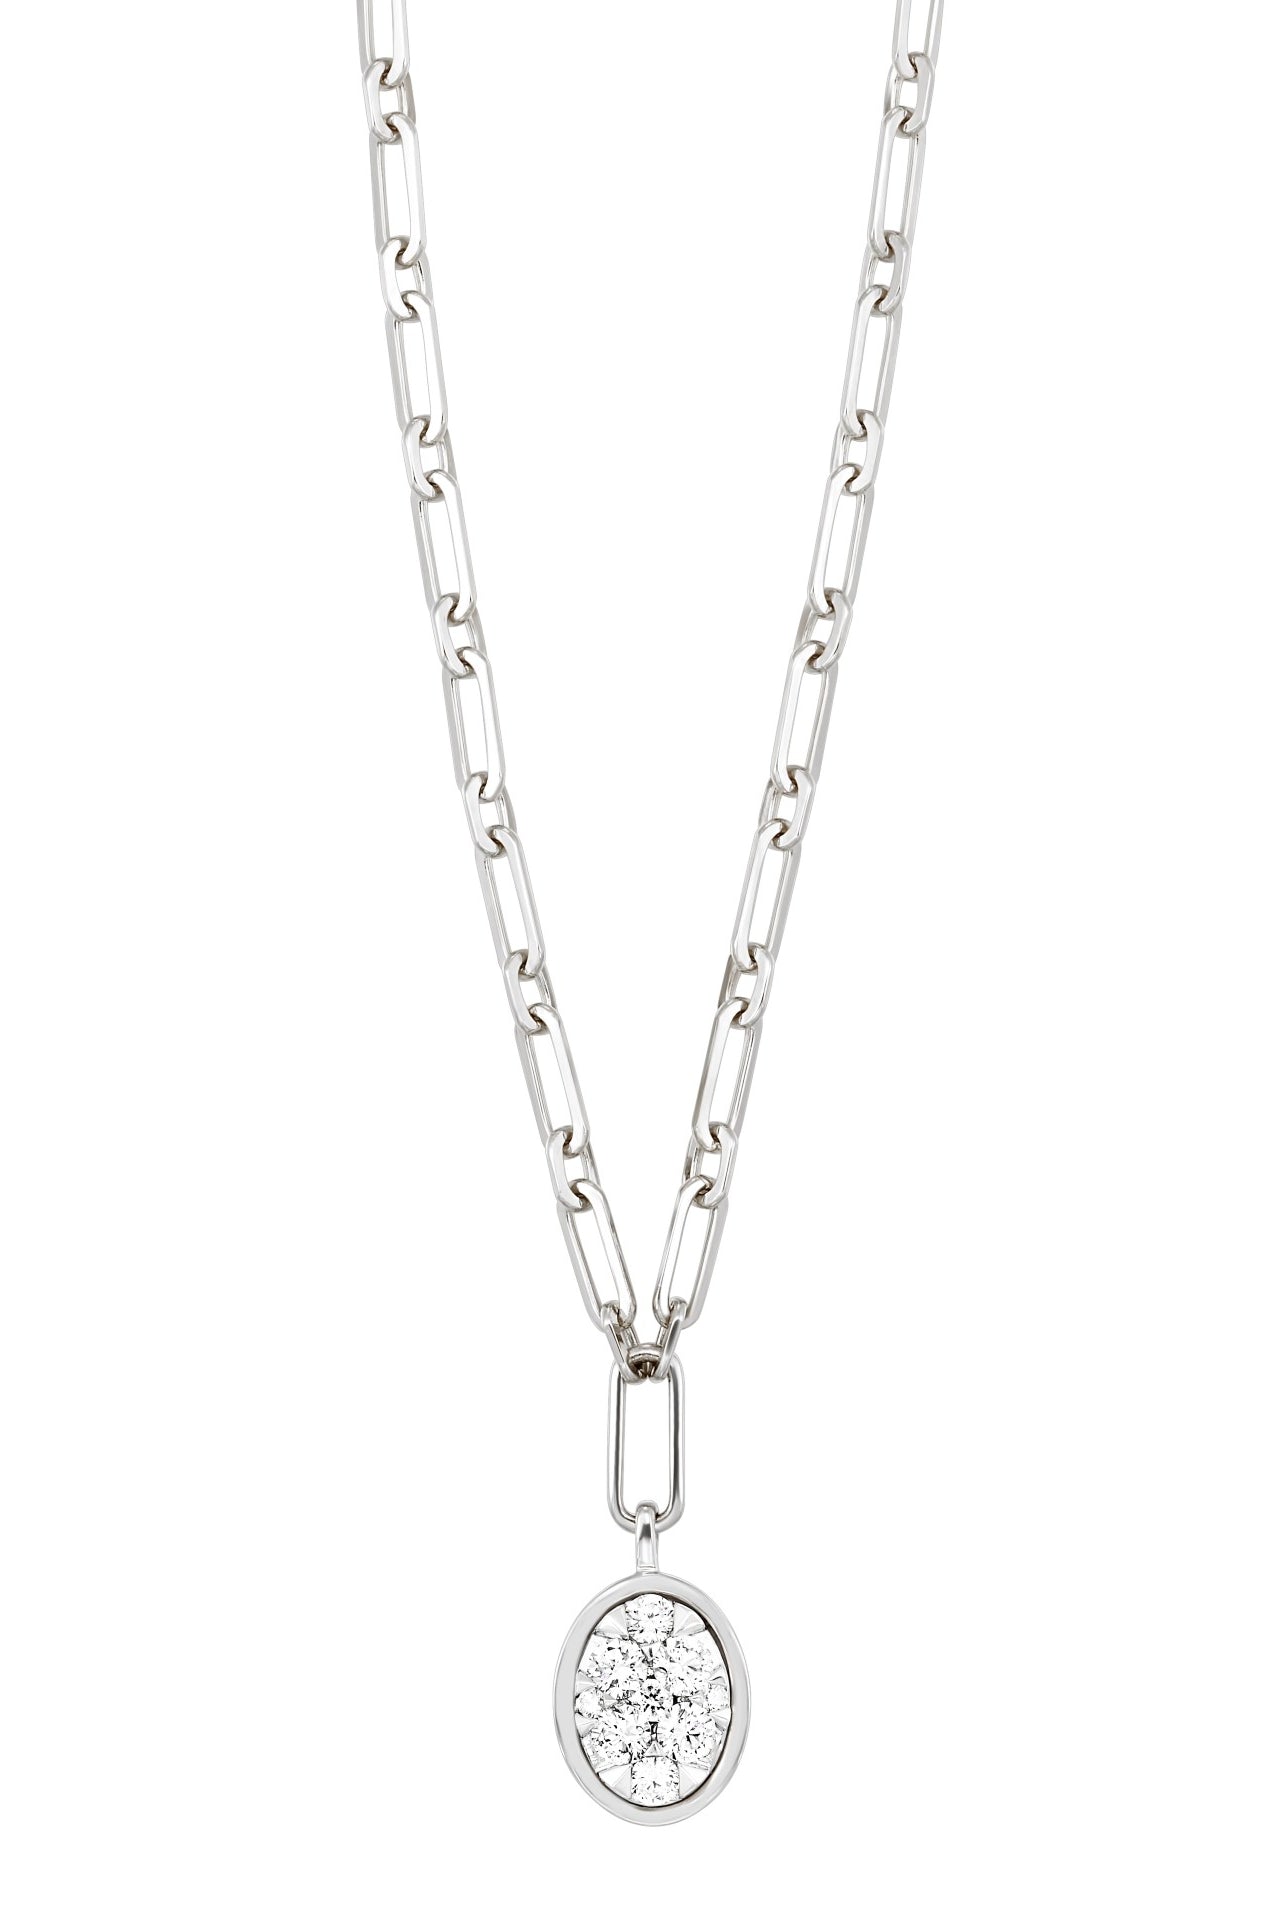 White Gold and Diamond Oval Cluster Pendant with Paperclip Chain